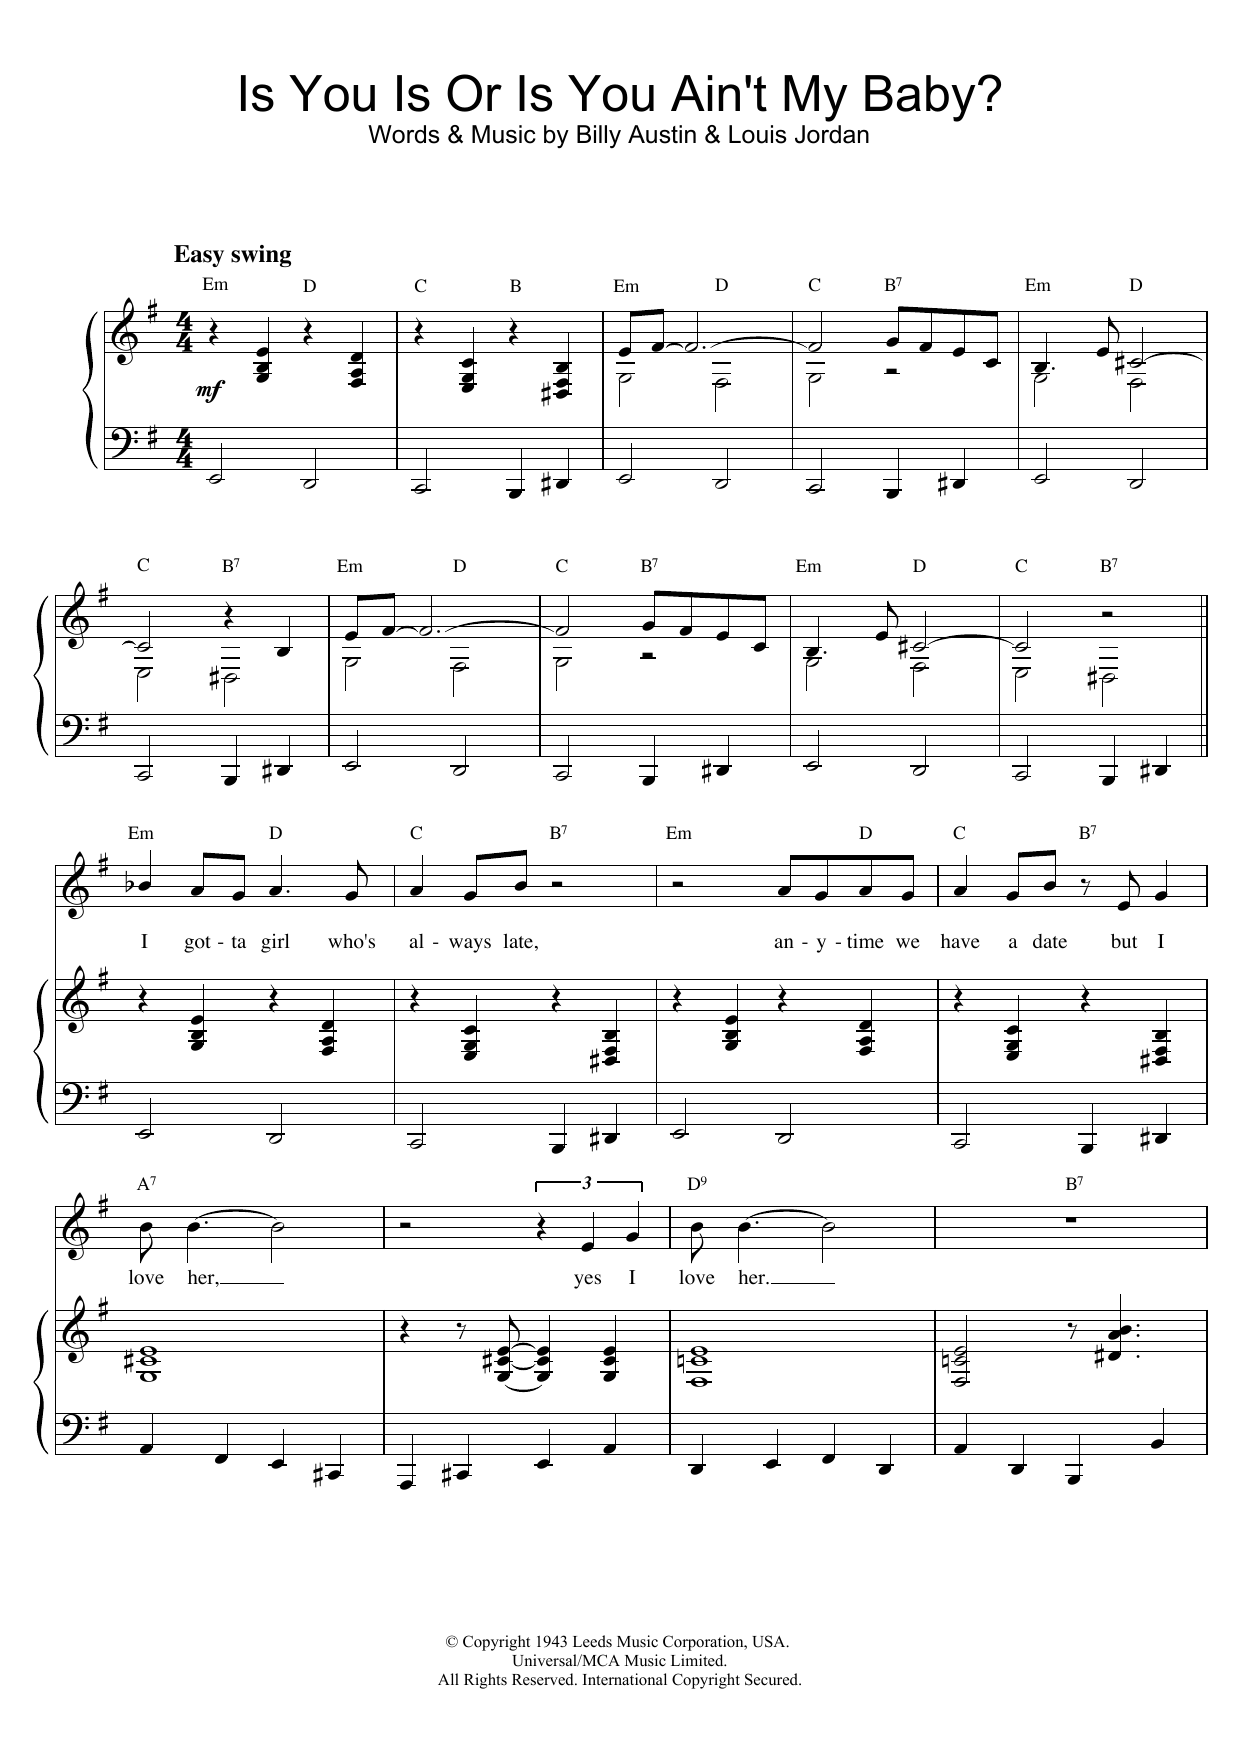 Download Louis Armstrong Is You Is Or Is You Ain't My Baby? Sheet Music